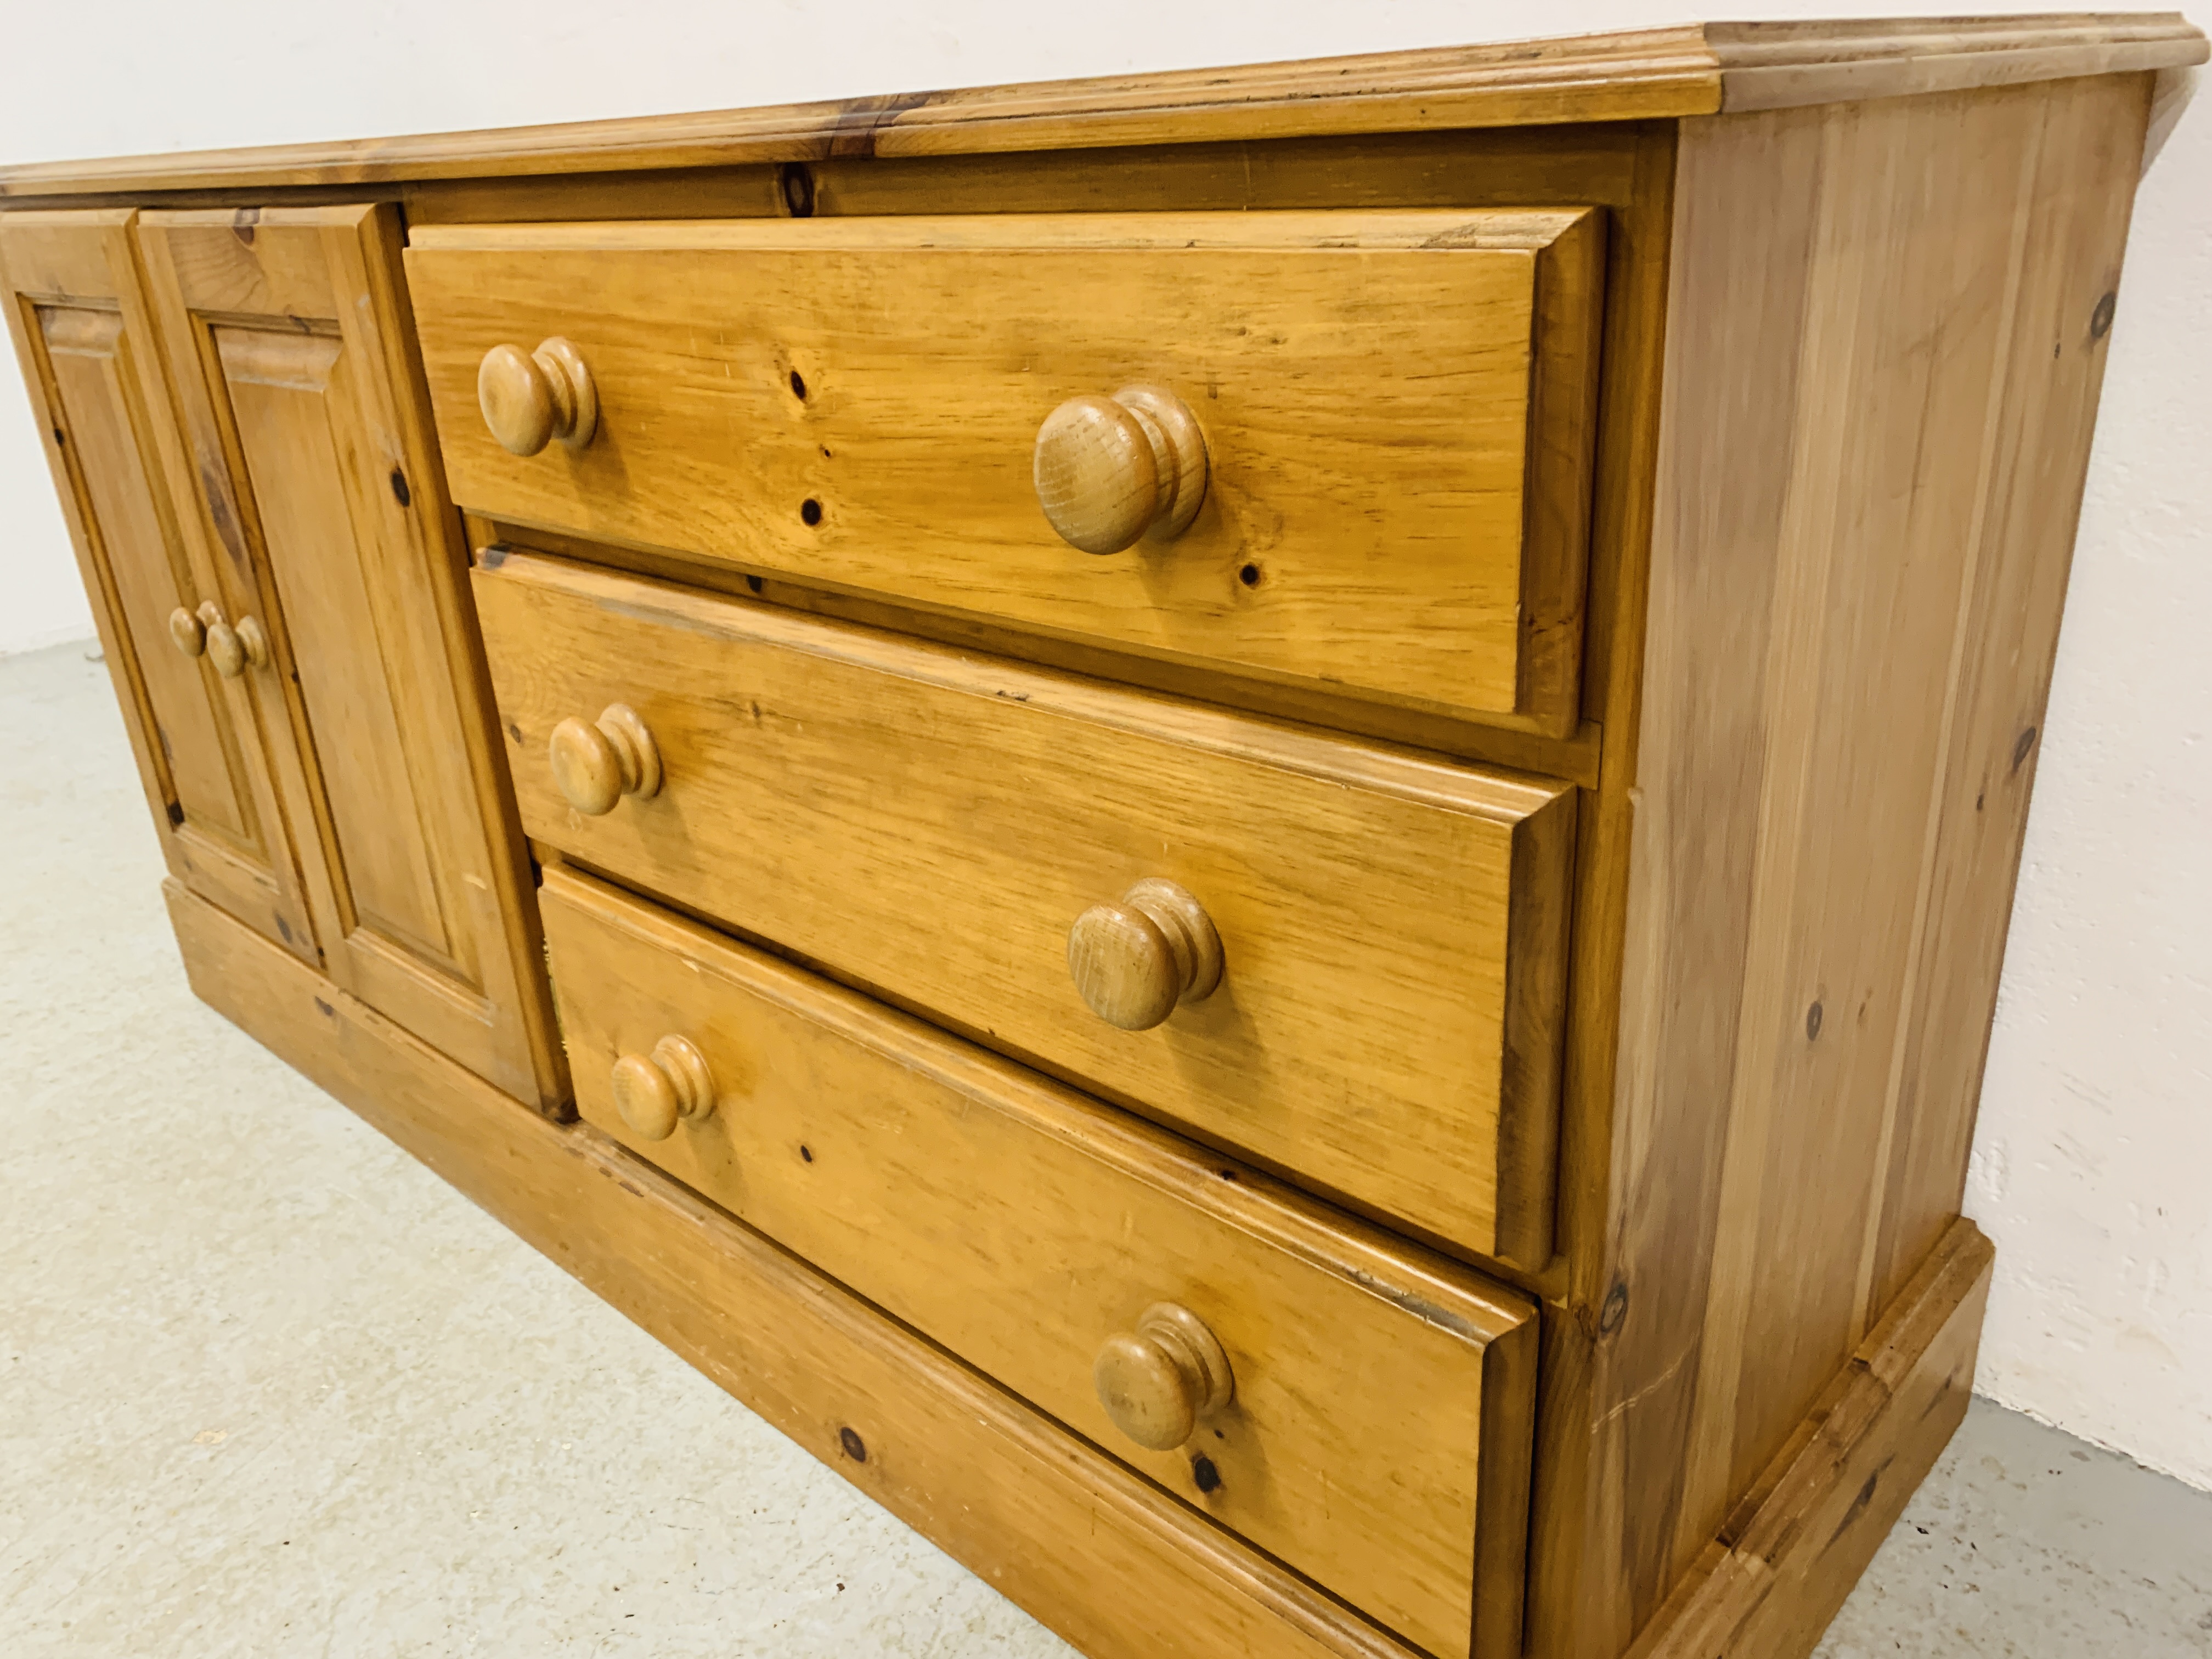 A SOLID HONEY PINE THREE DRAWER DRESSER BASE WITH CABINET TO ONE END - W 130CM. D 41CM. H 66CM. - Image 4 of 9